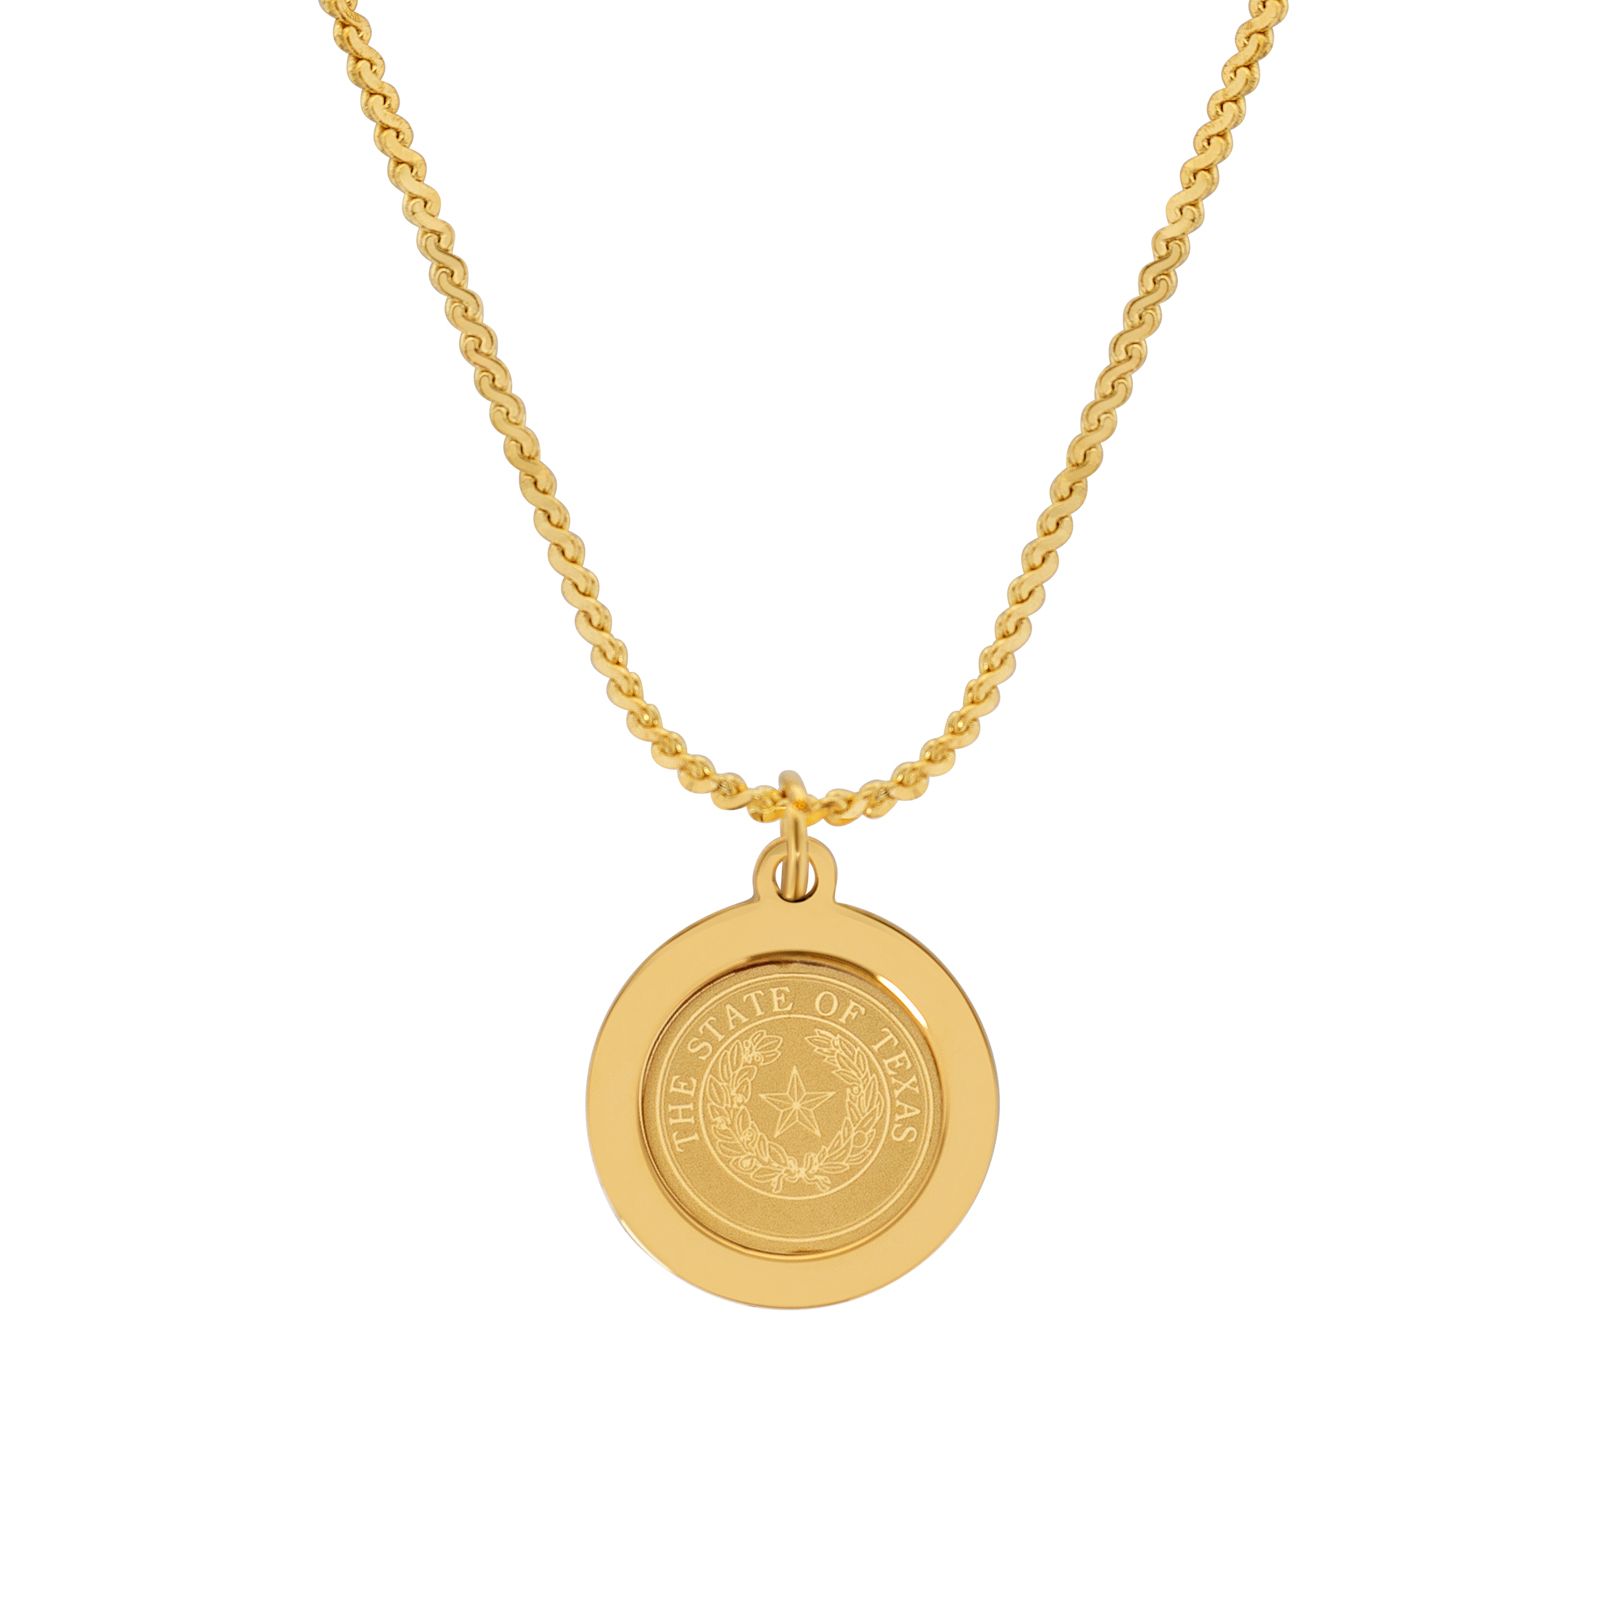 Texas State Seal Gold-Plated Pendant Necklace